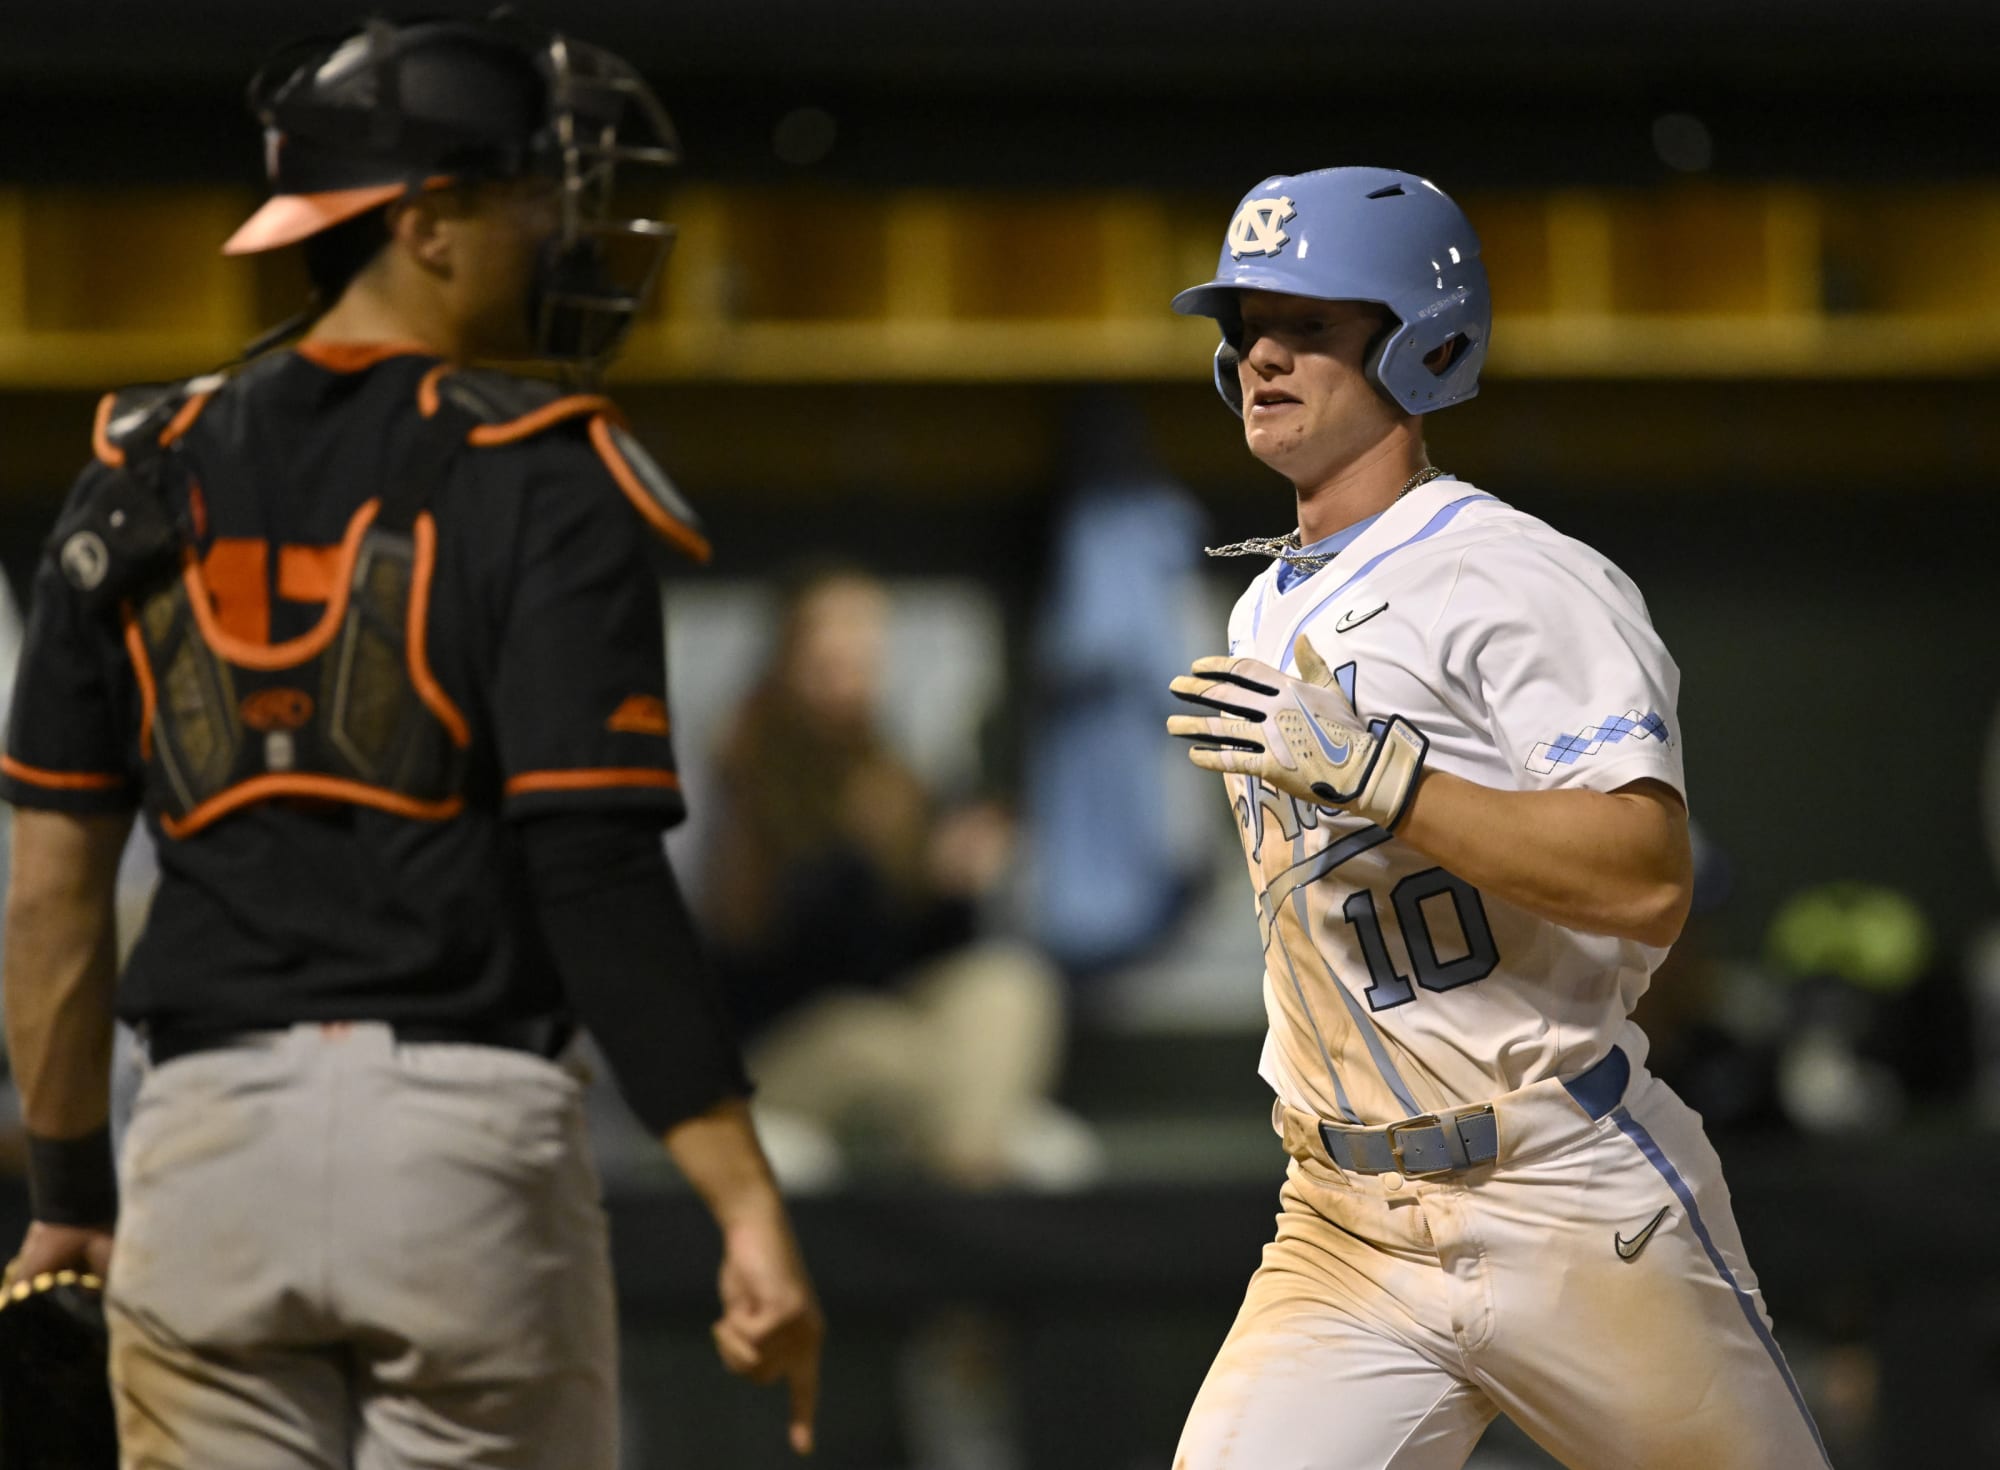 UNC Baseball: Offense on pace for record year in 2023